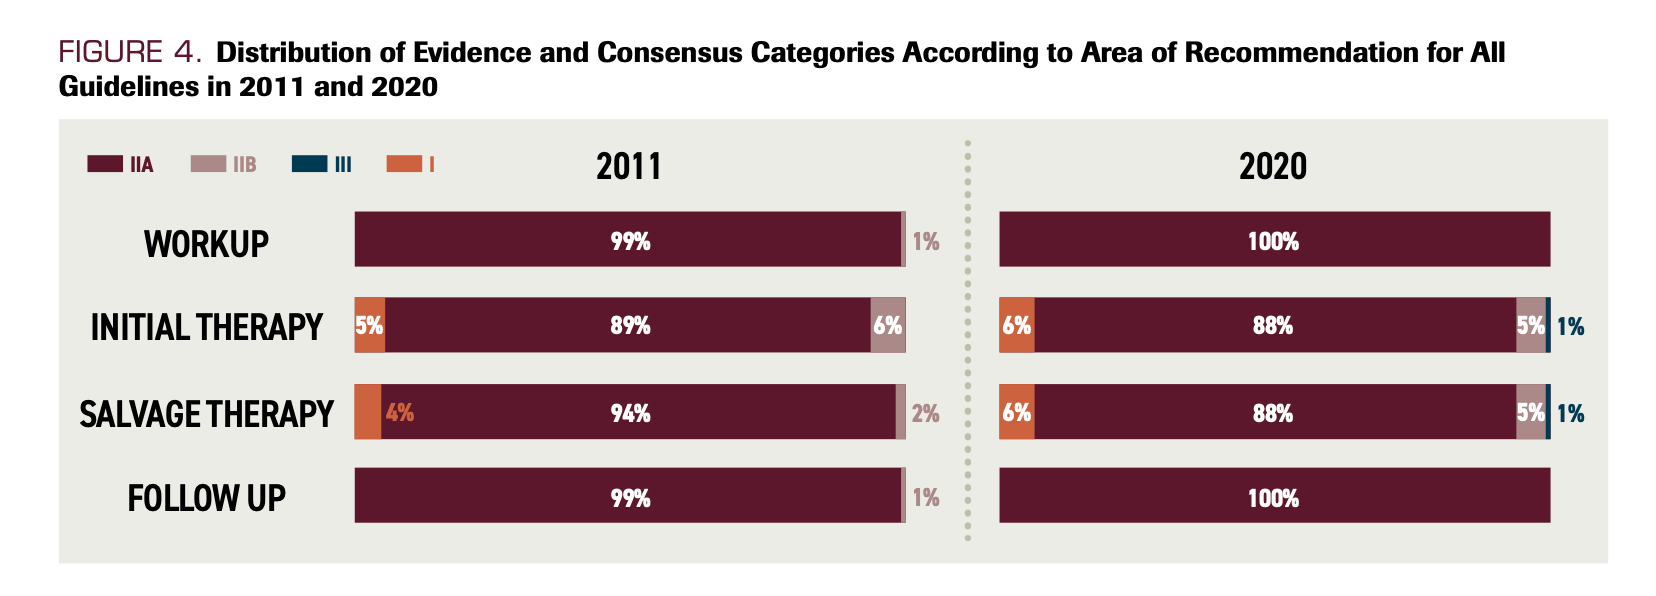 FIGURE 4. Distribution of Evidence and Consensus Categories According to Area of Recommendation for All Guidelines in 2011 and 2020